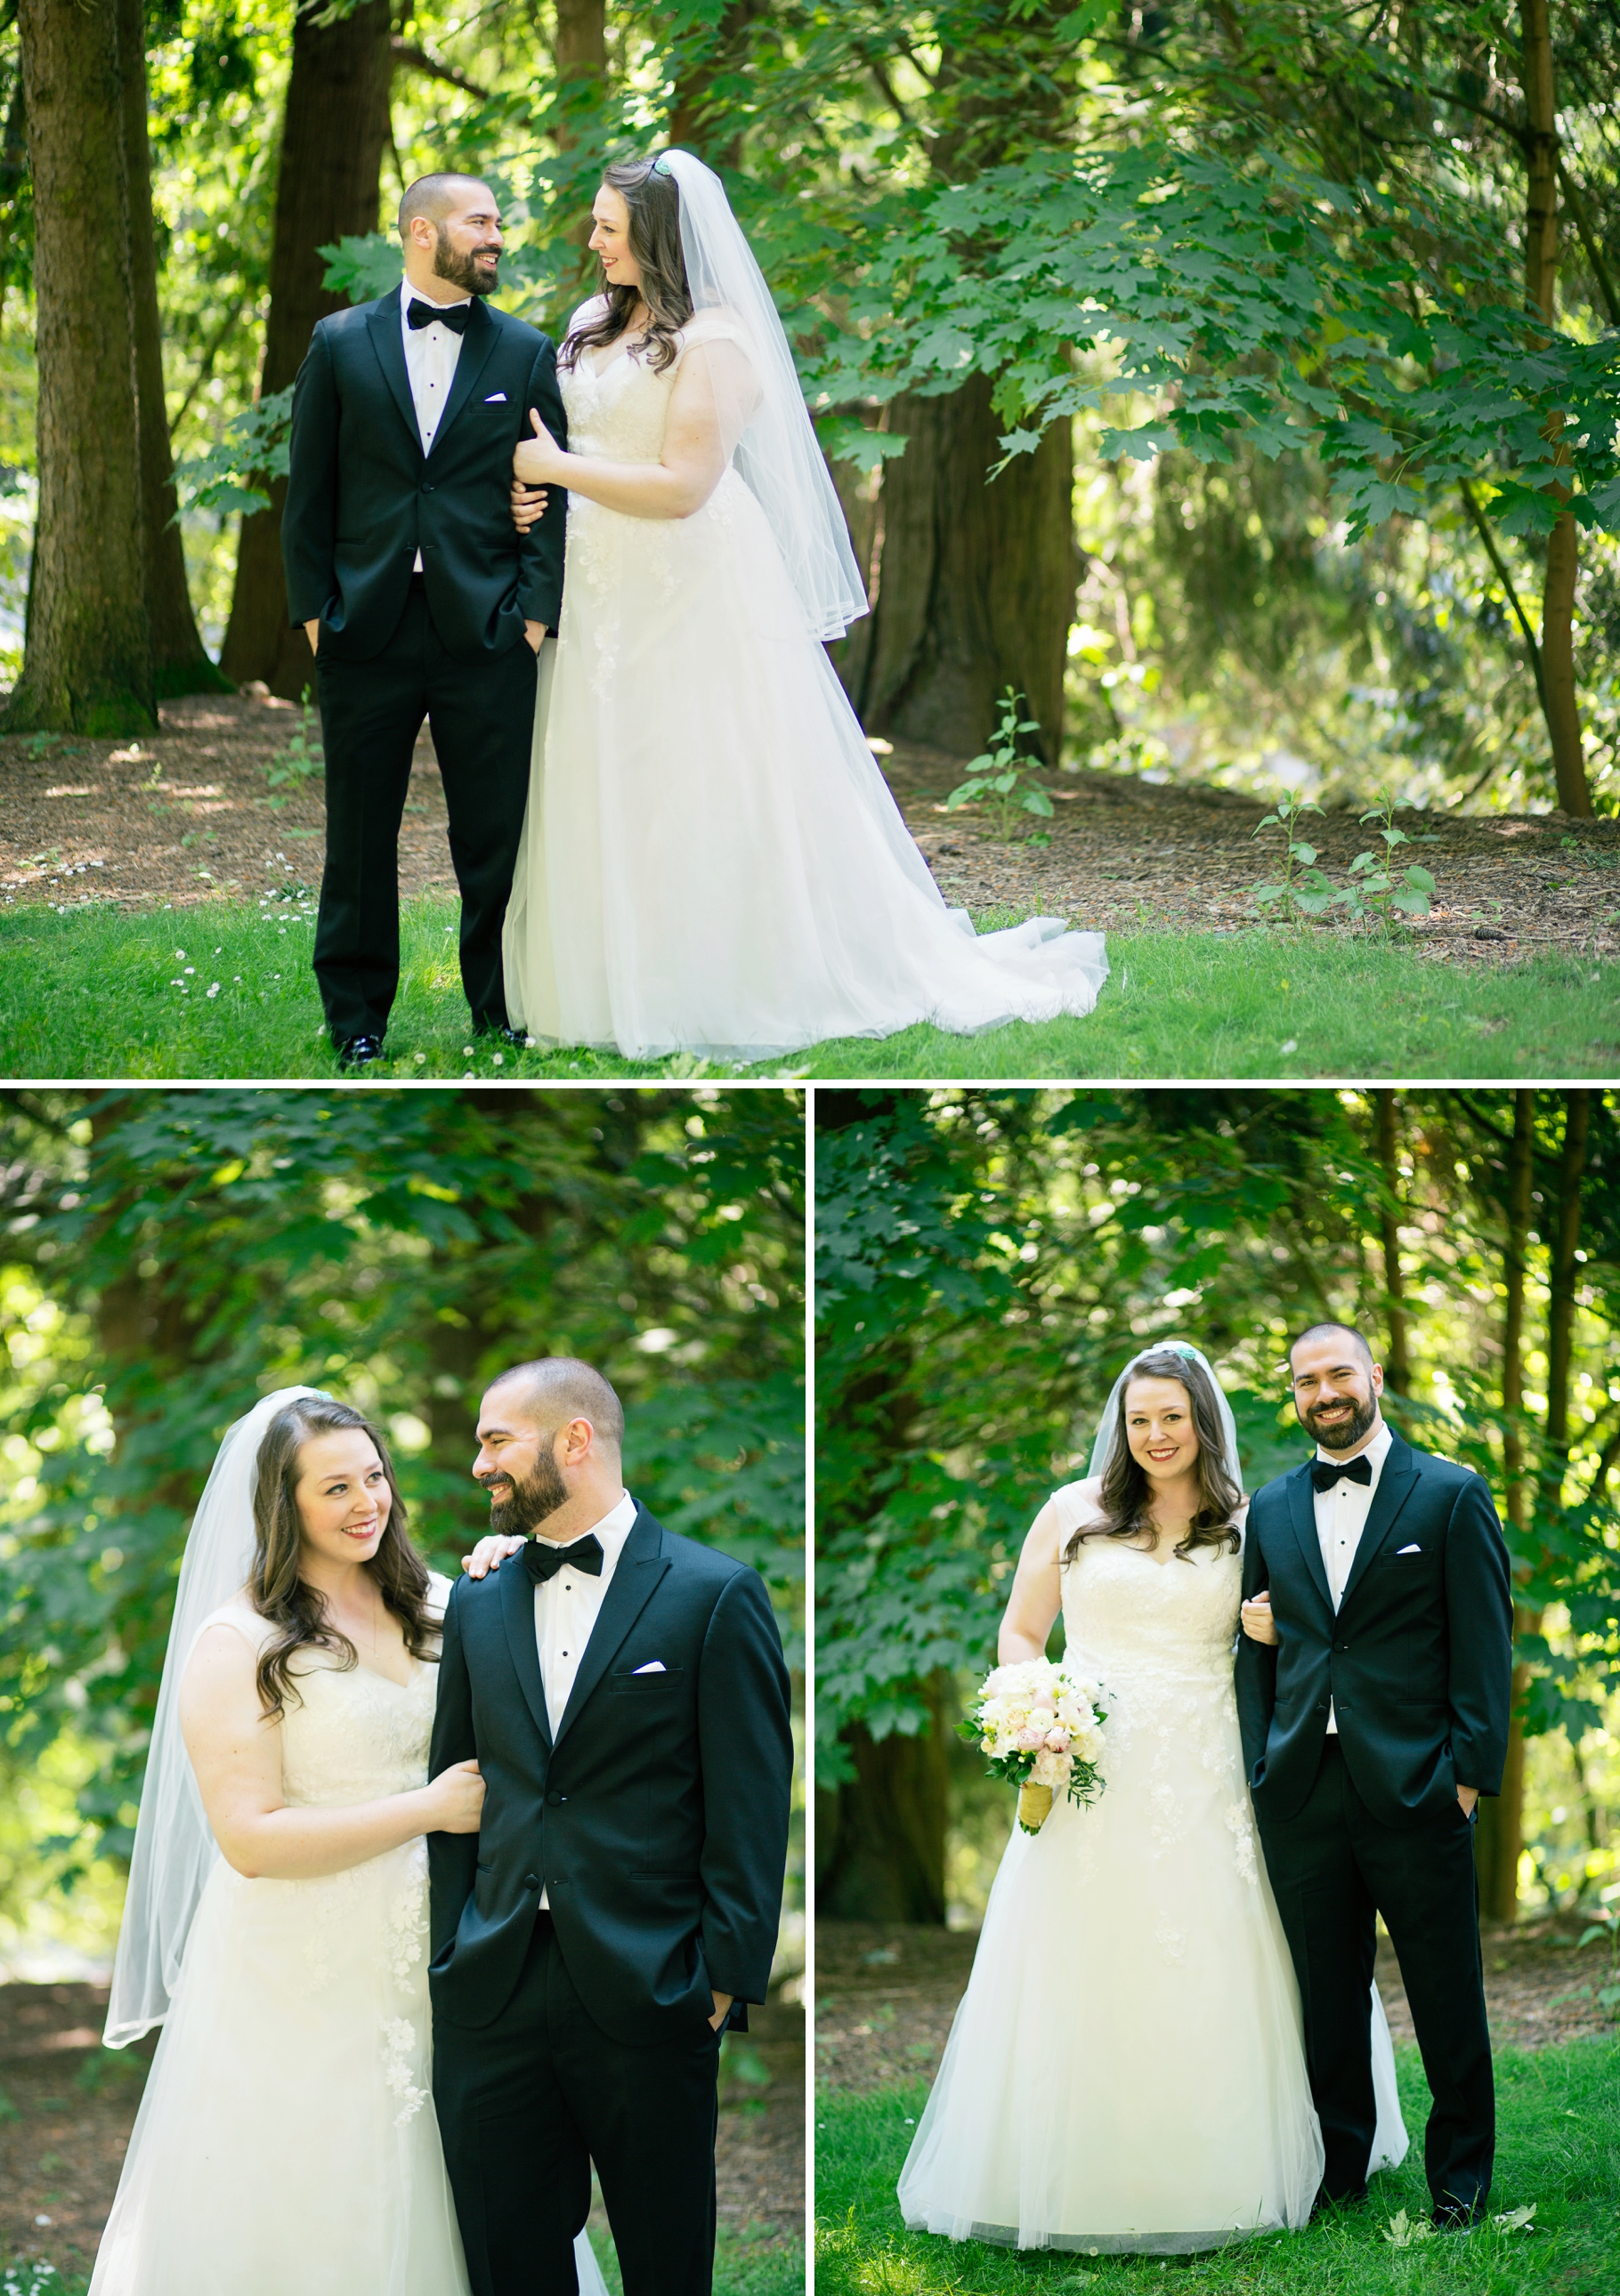 14-First-Look-Bride-Groom-Woodland-Park-Seattle-Wedding-Photographer-Photography-by-Betty-Elaine